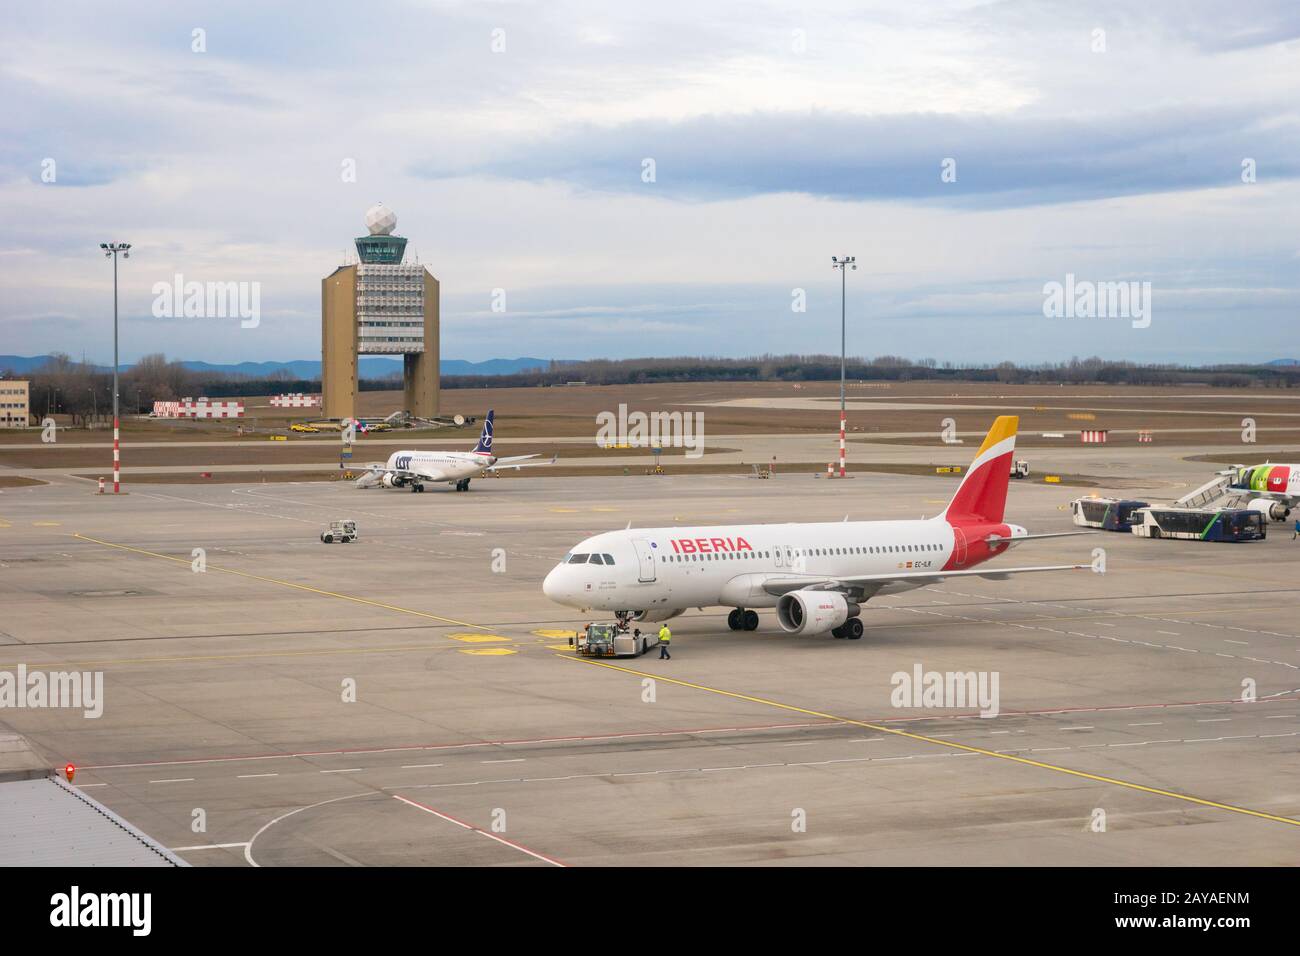 Budapest, Hungary - February 2020: Iberia Airlines aircraft on runway of Budapest Ferenc Liszt International Airport. Stock Photo